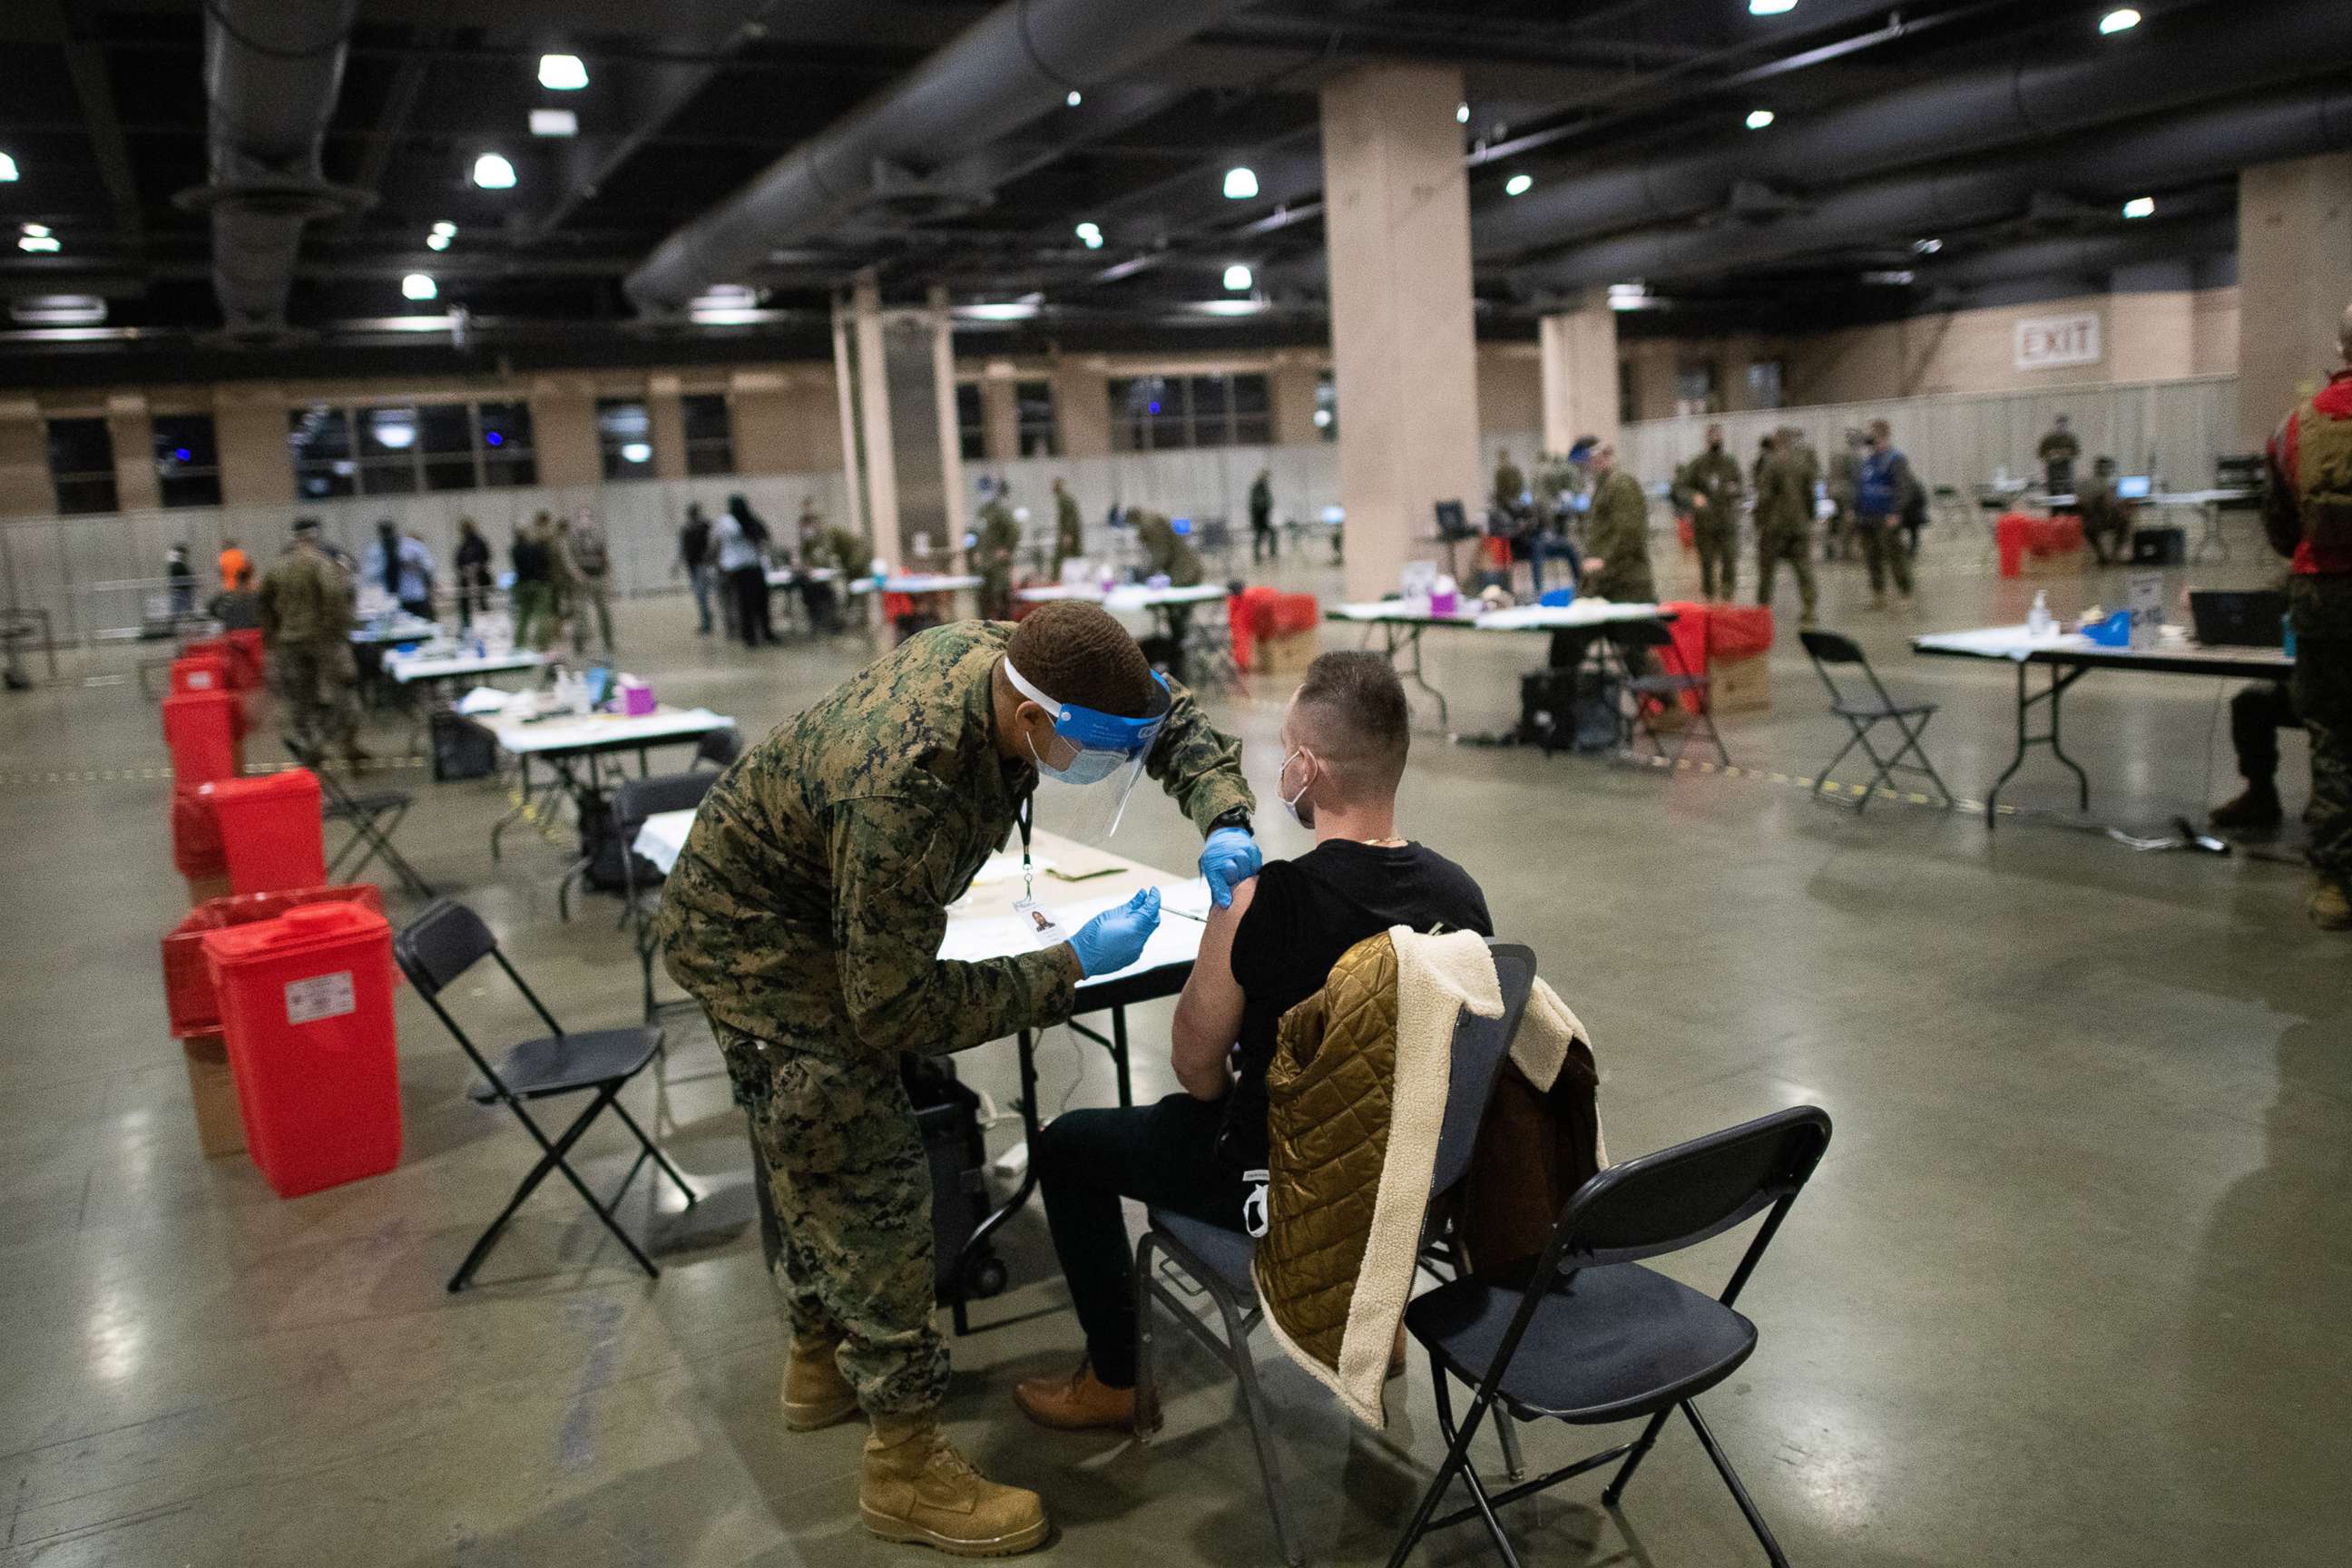 PHOTO: A member of the U.S. Armed Forces administers a COVID-19 vaccine at a FEMA community vaccination center, March 2, 2021 in Philadelphia.